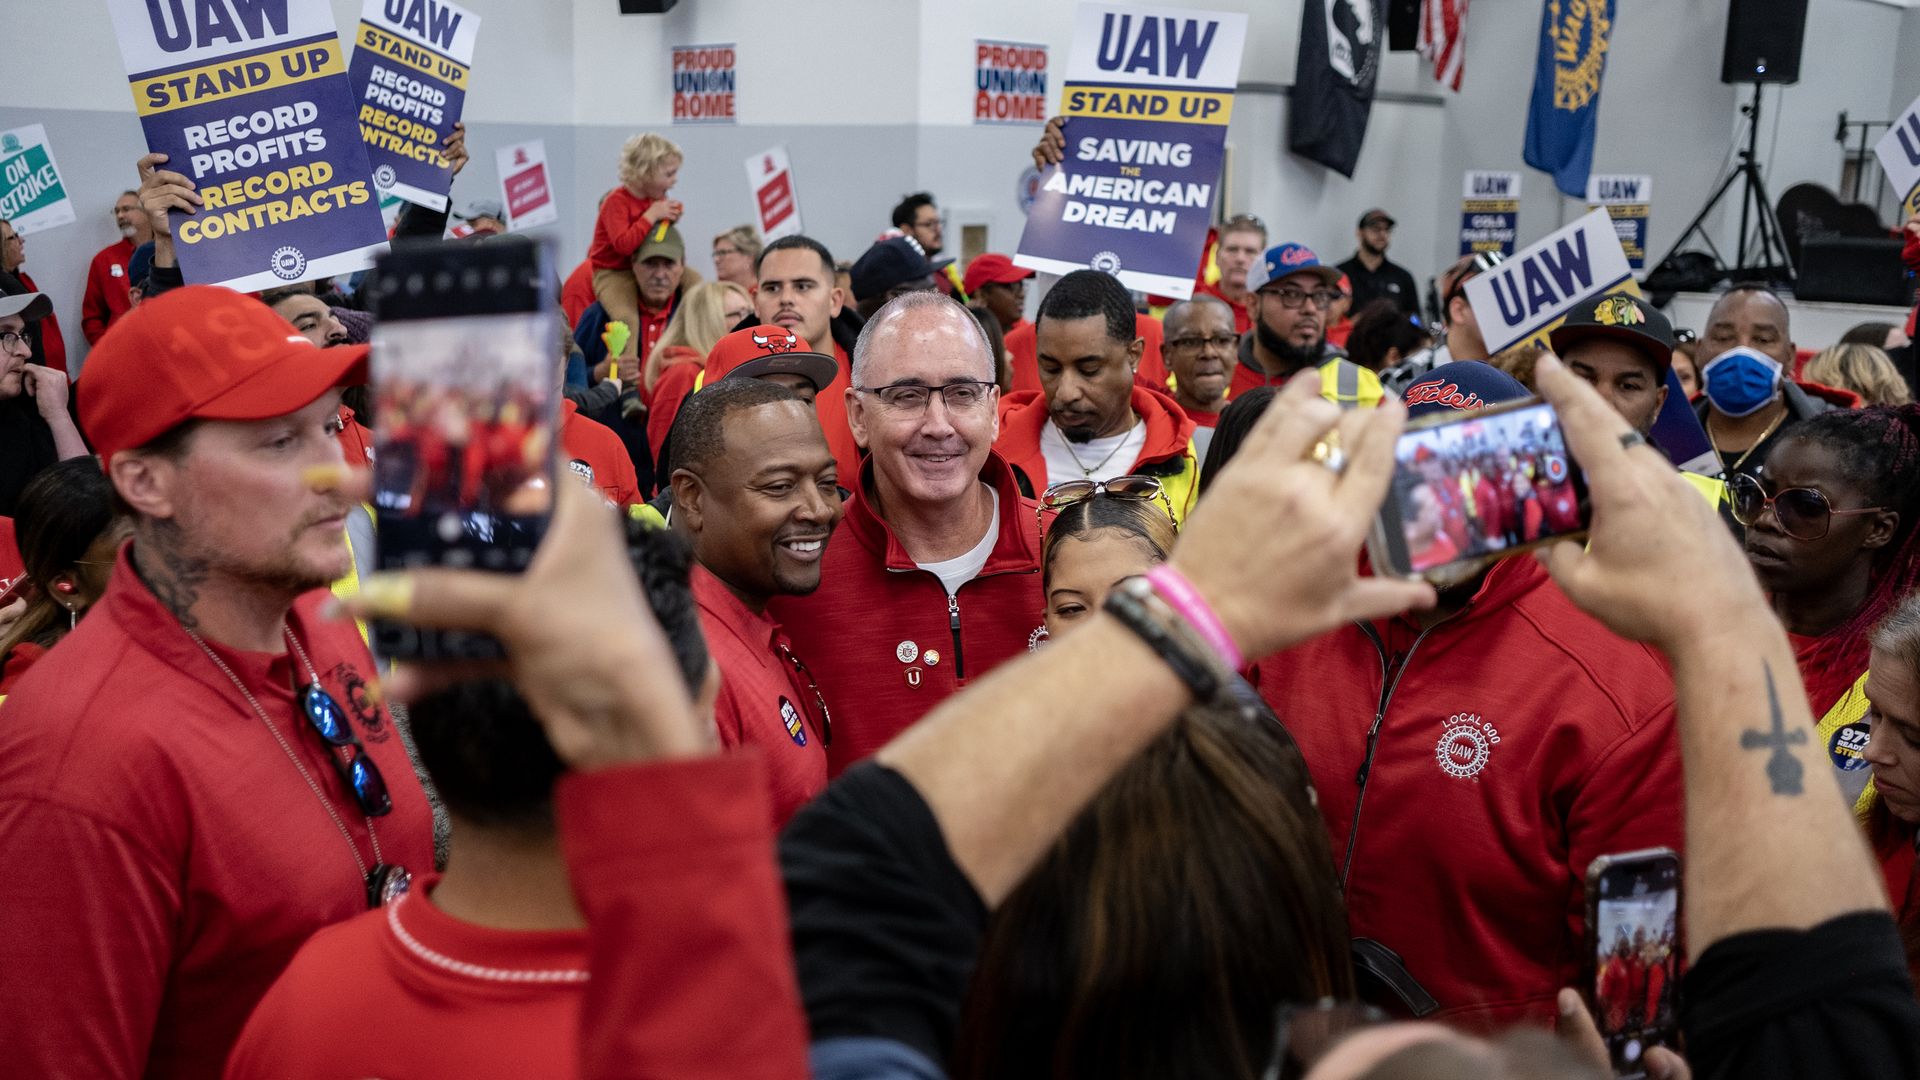  UAW President Shawn Fain greets members attending a rally in support of the labor union strike at the UAW Local 551 hall on the South Side on October 7, 2023 in Chicago, Illinois. 